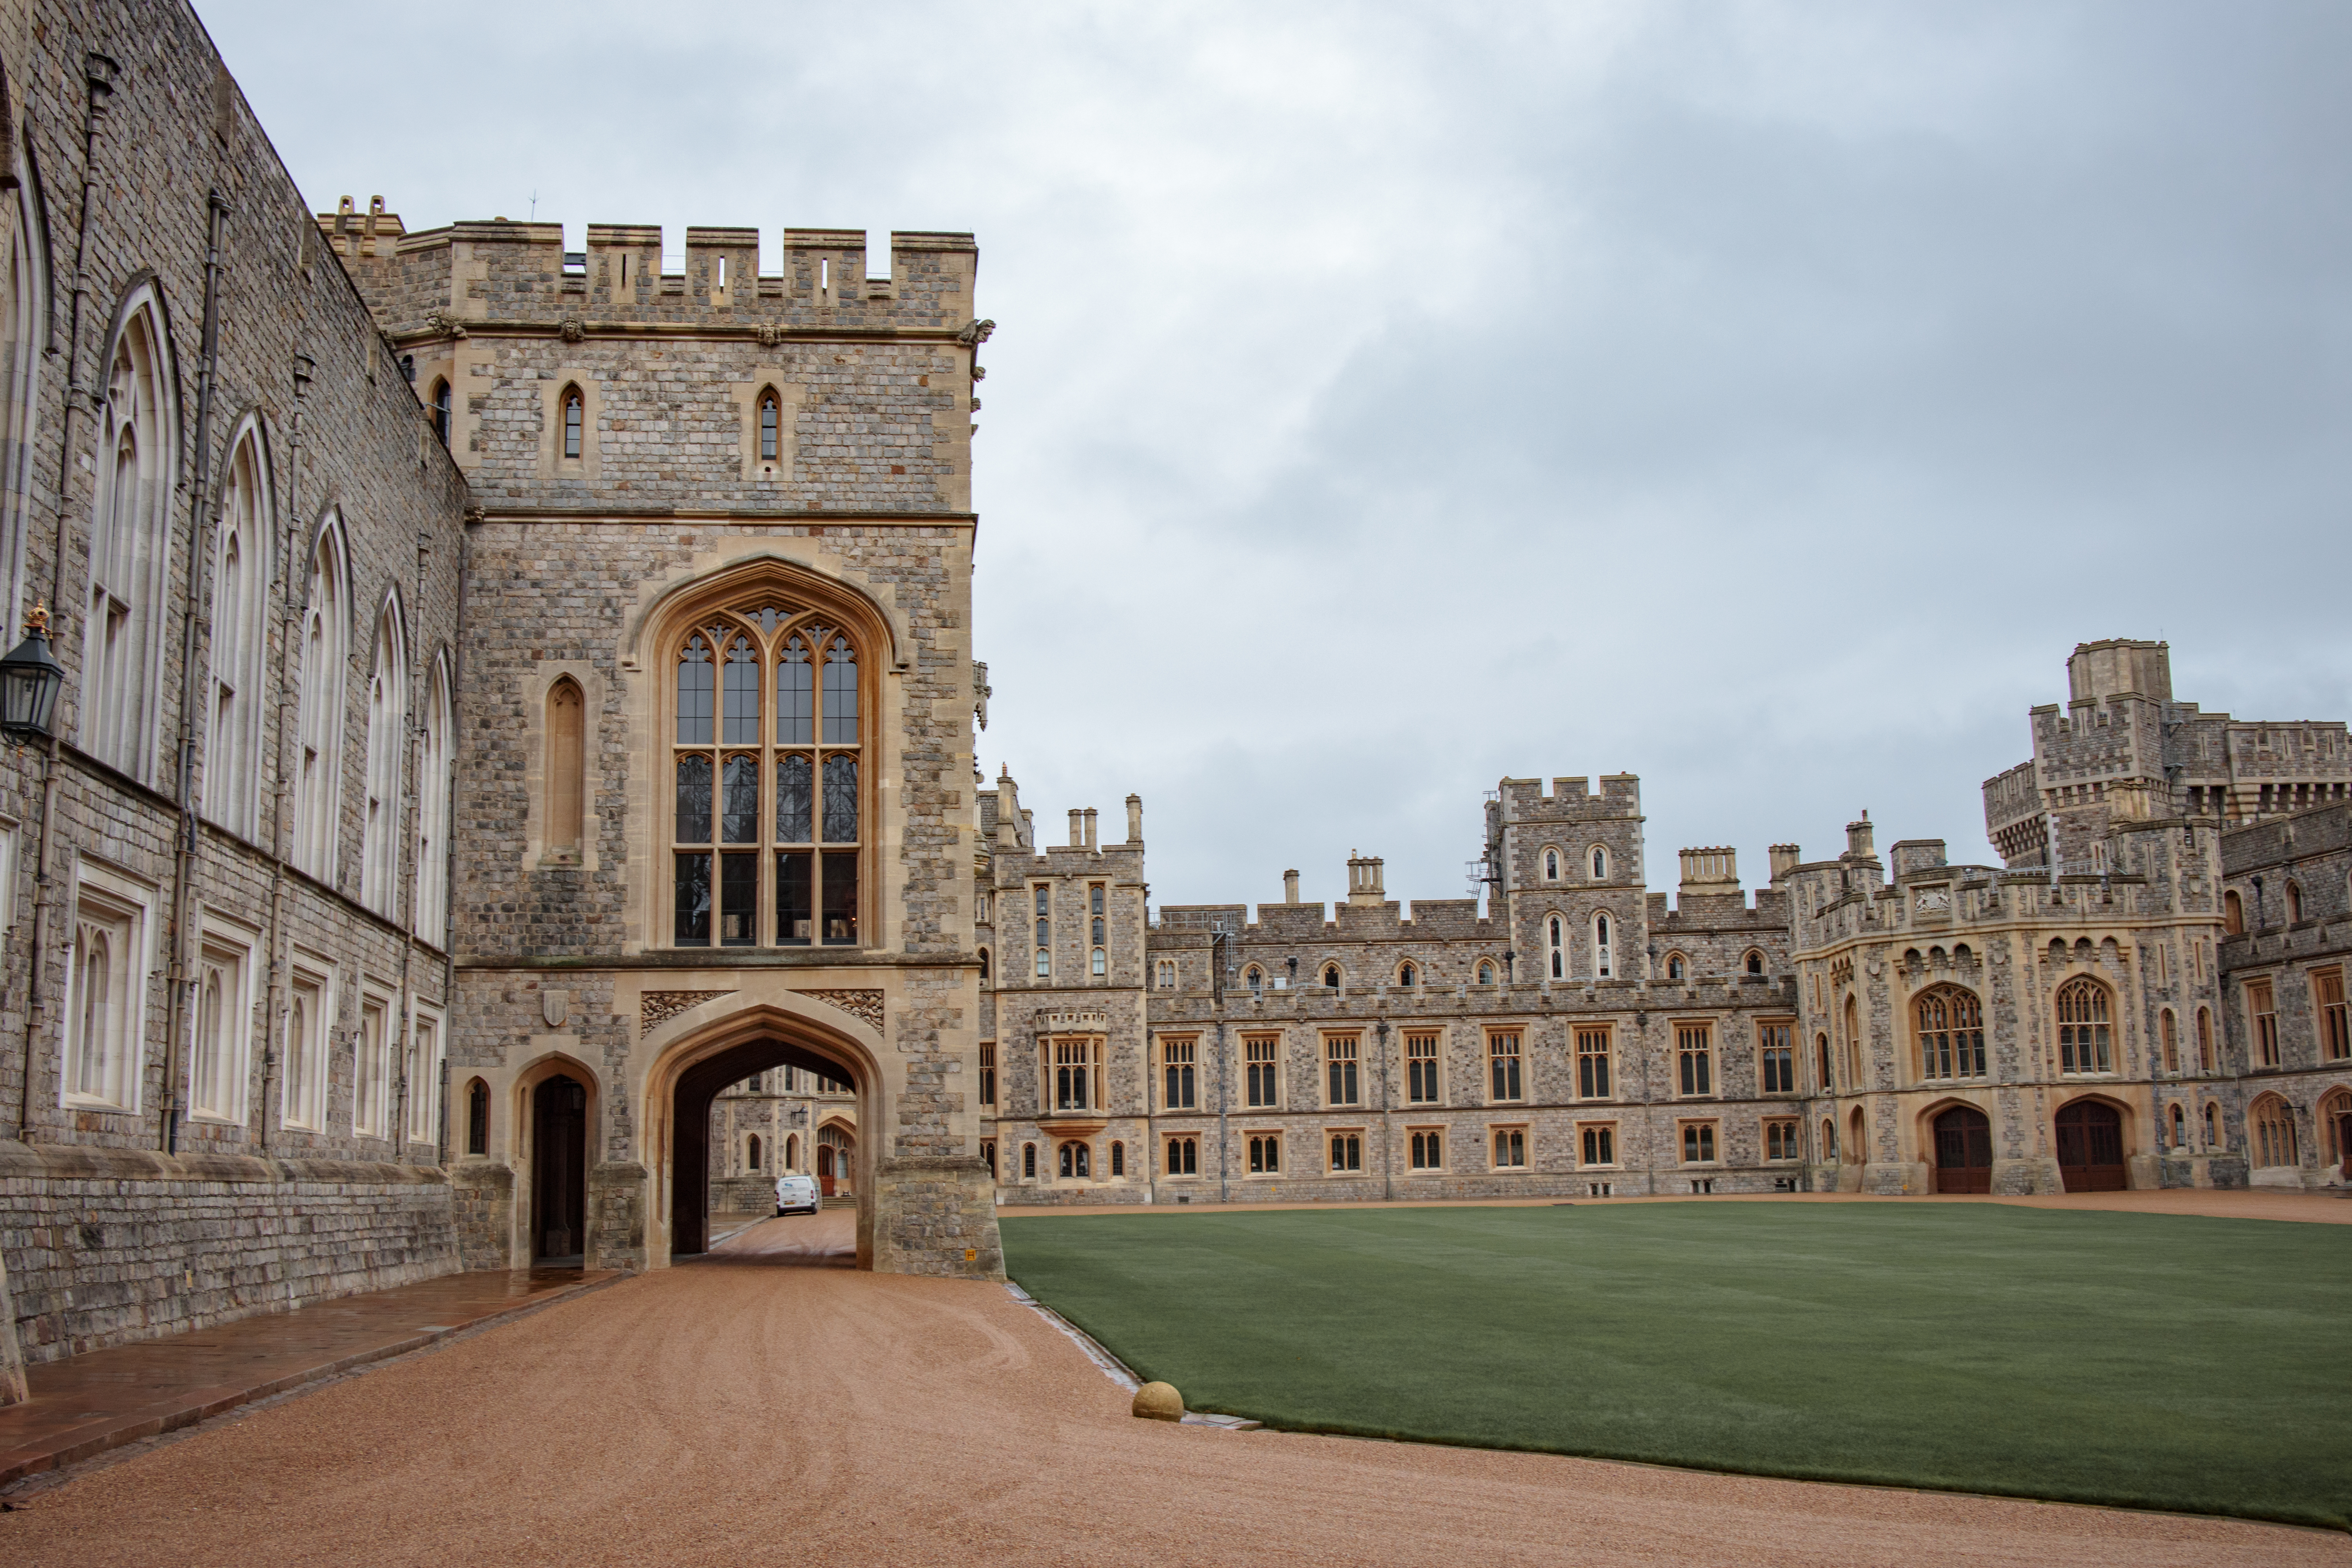 Best Things to Do in England - Windsor Castle